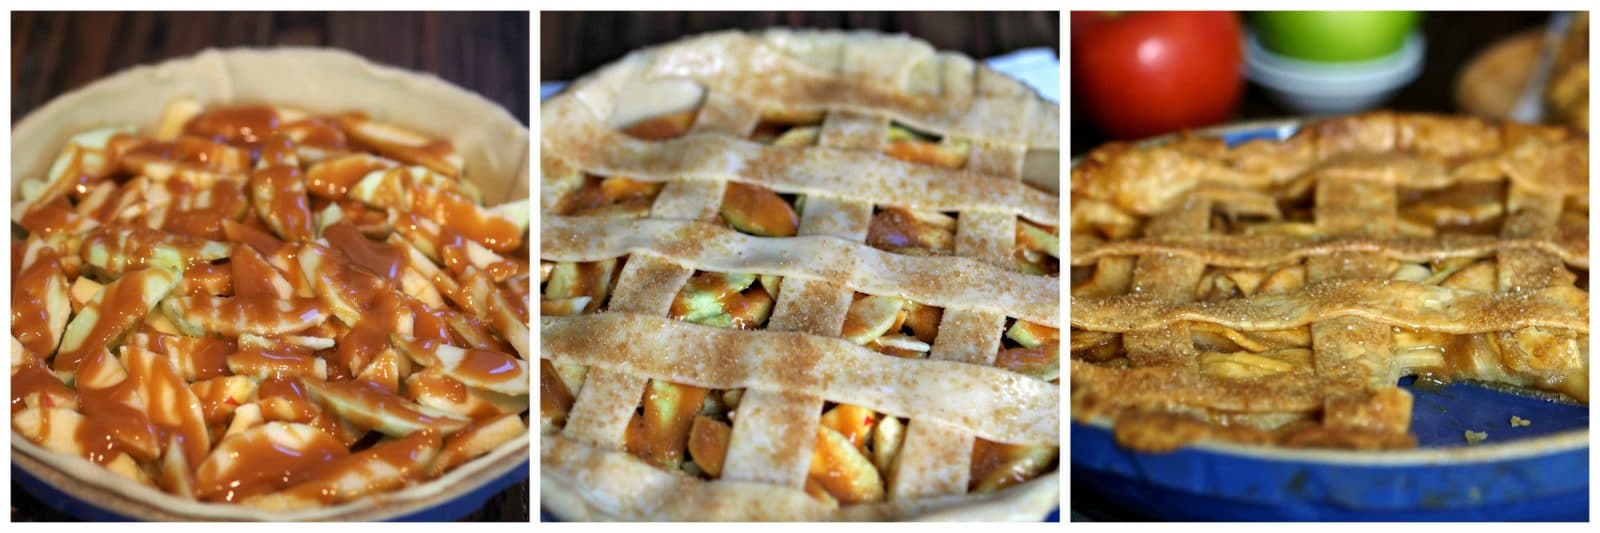 Salted Caramel Apple Tart (made the easy way) with store-bought Salted Caramel Sauce & pie crust is as easy as can be. Sweet/salty/delicious. Simply Sated